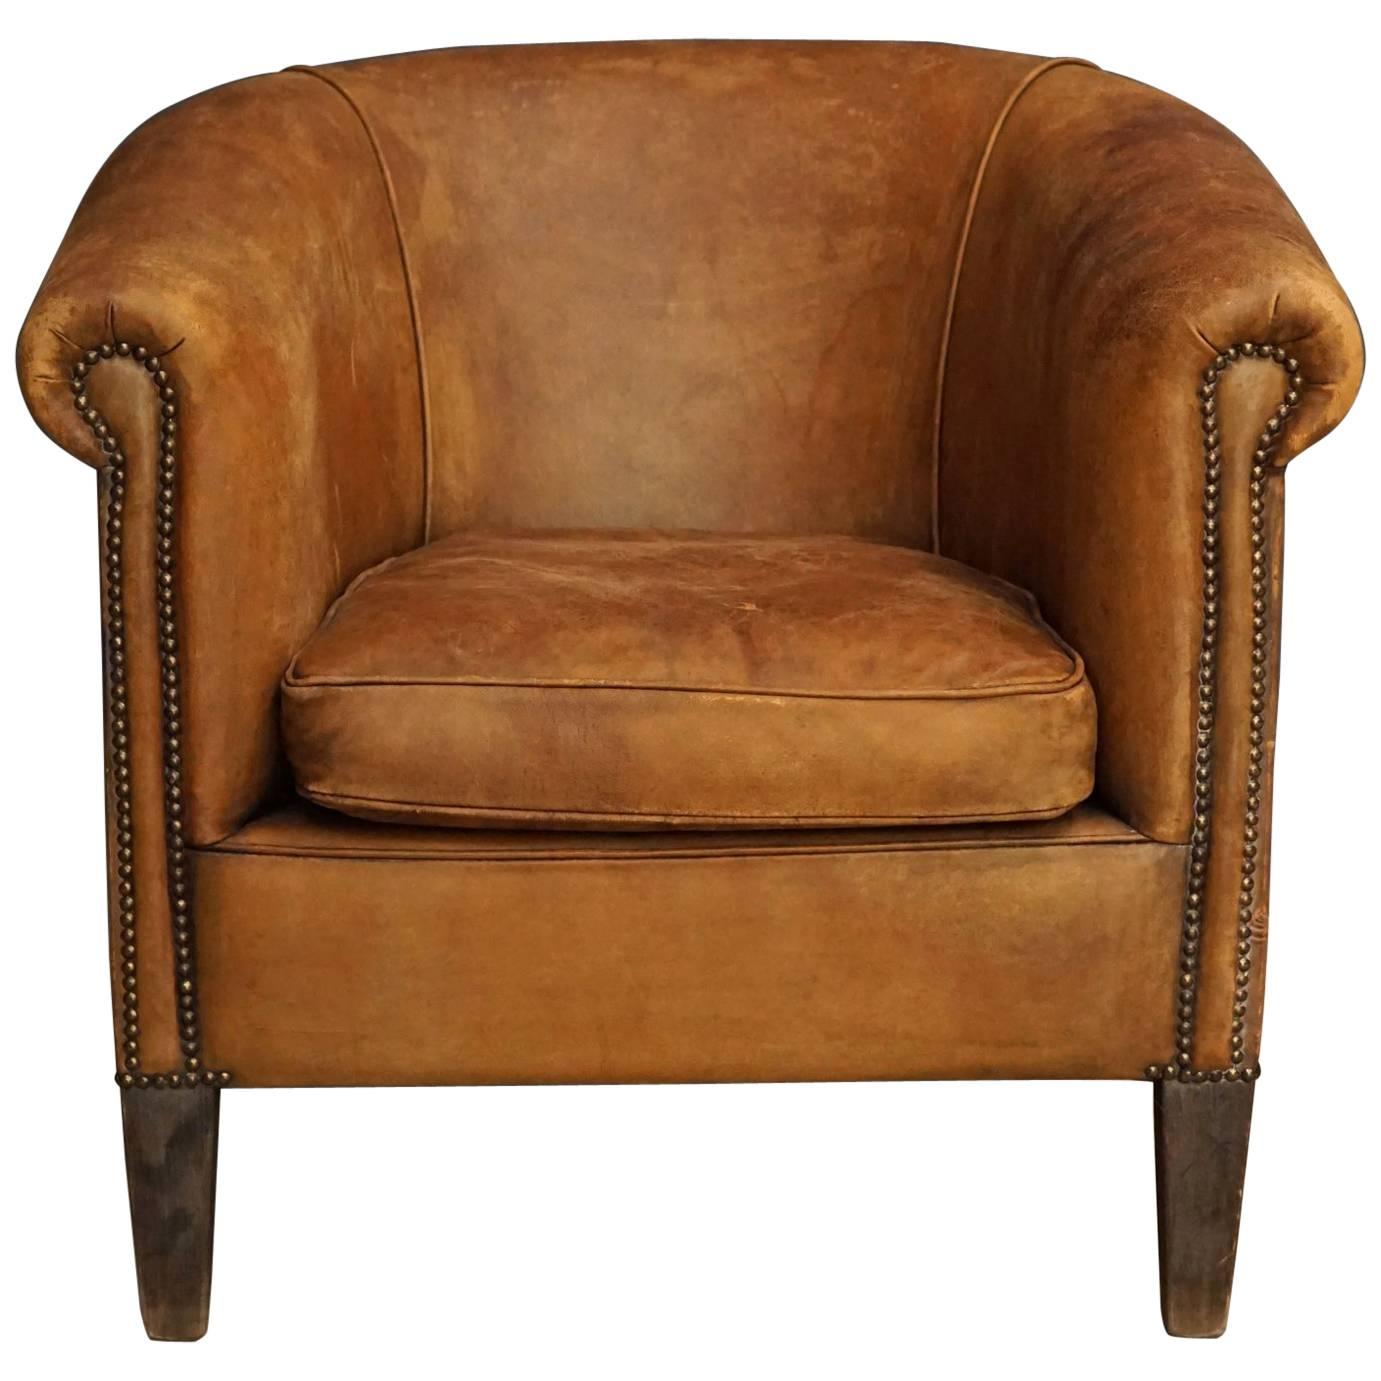 Vintage French Cognac Leather Club Chair